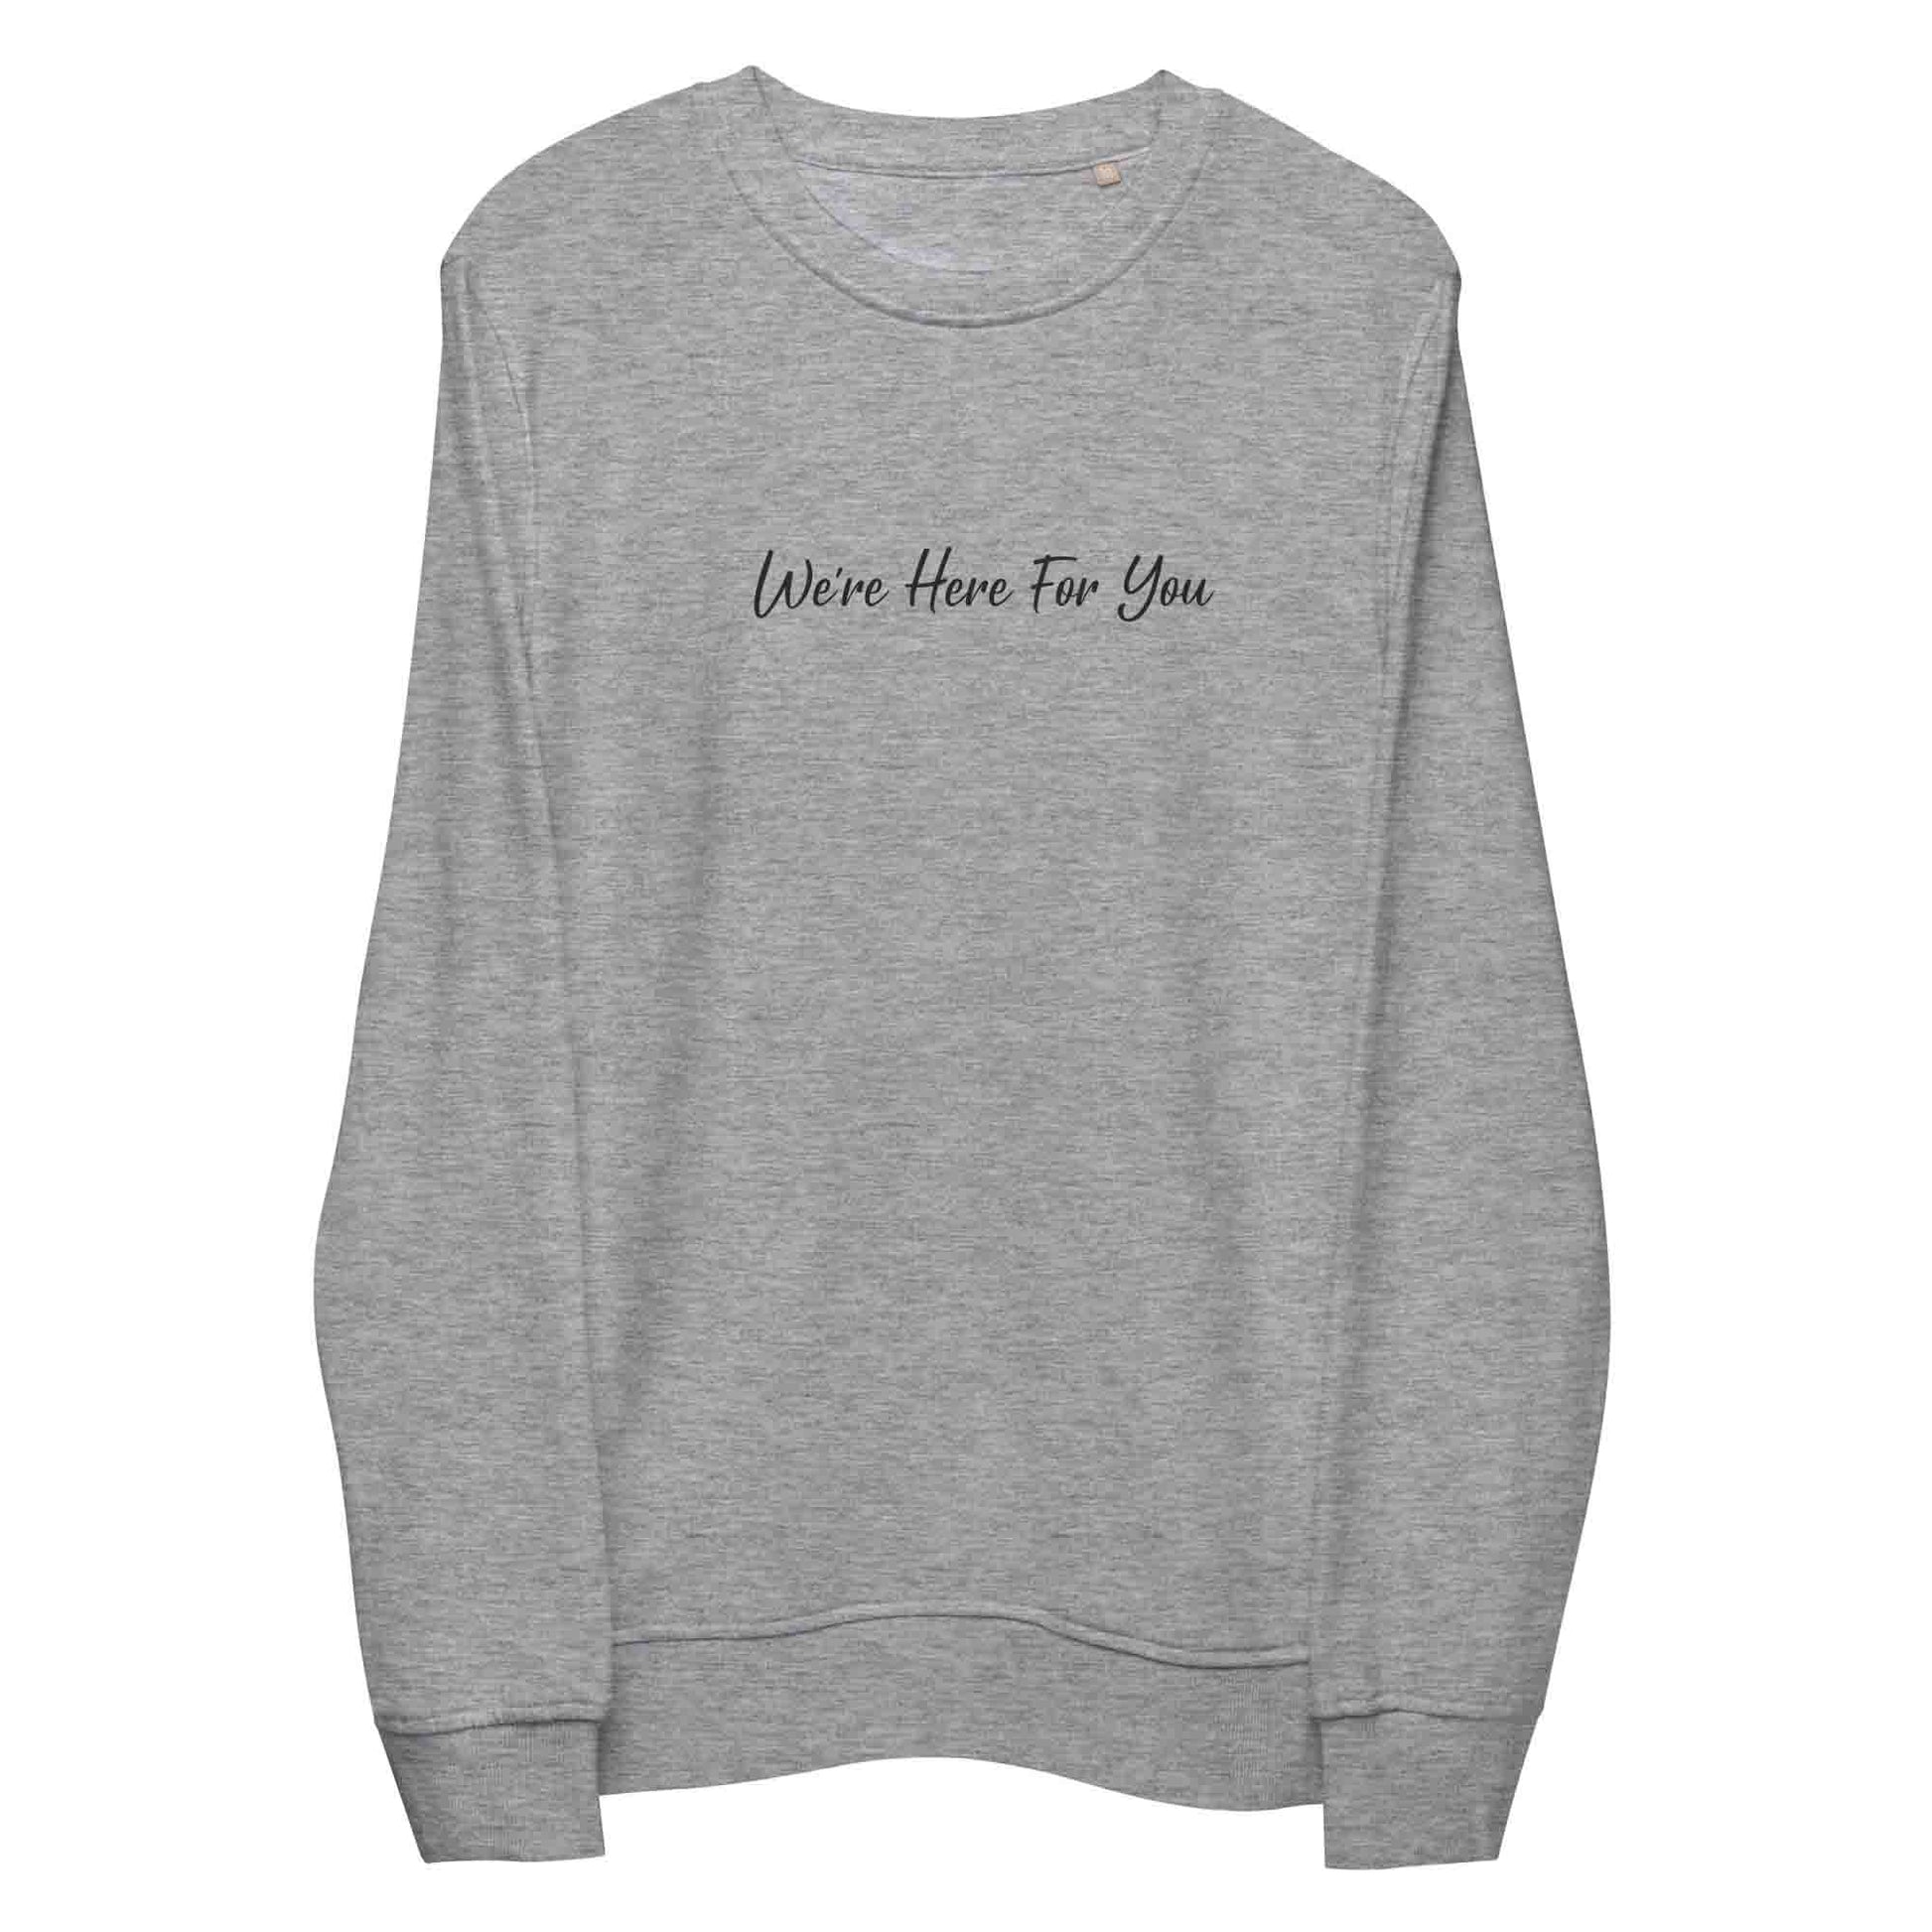 Women light gray sustainable sweatshirt with inspirational quote, "We Are Here For You."